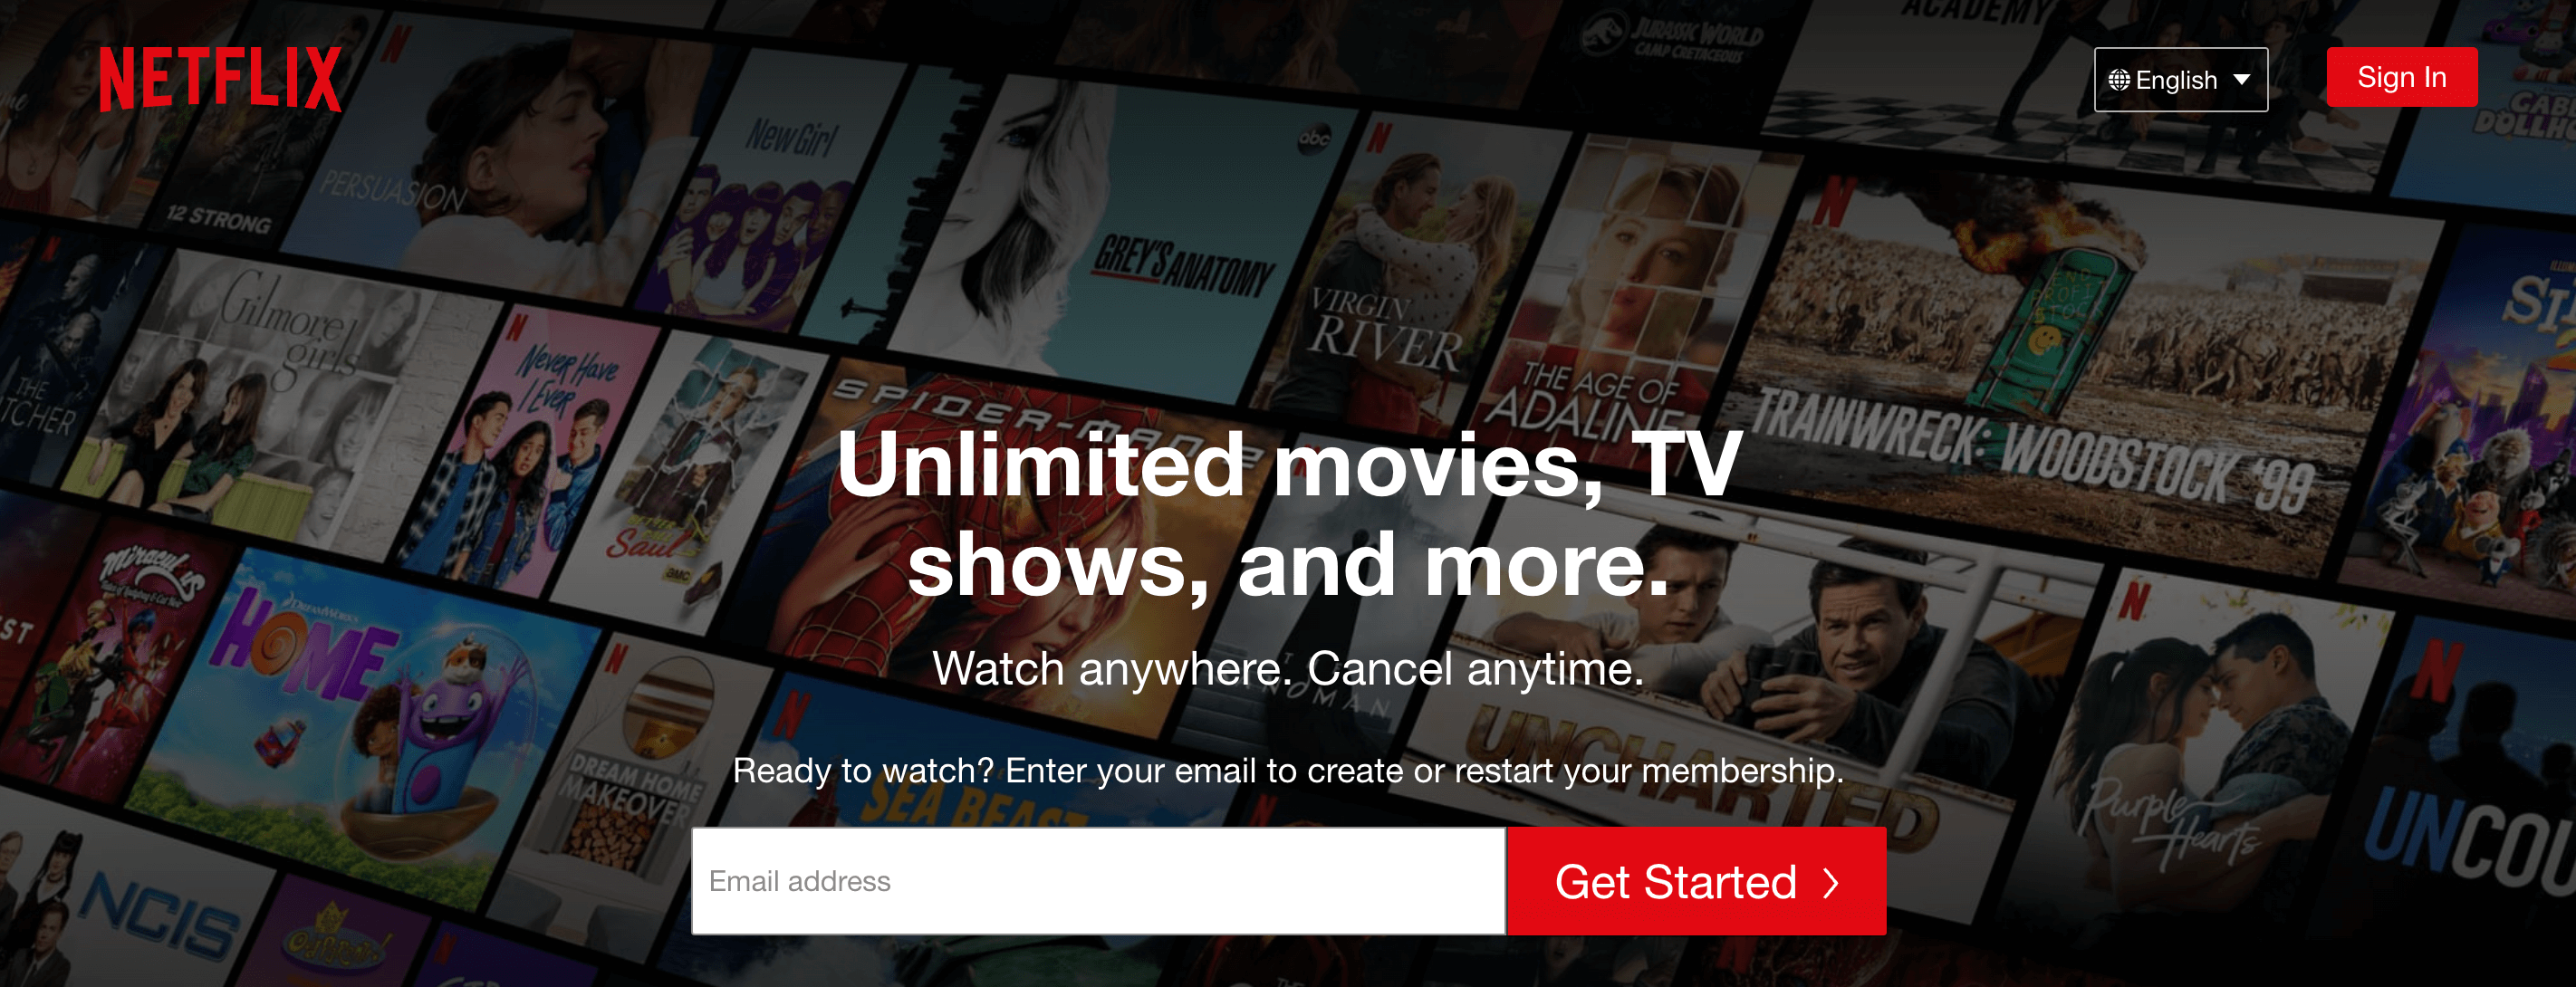 Netflix's home page